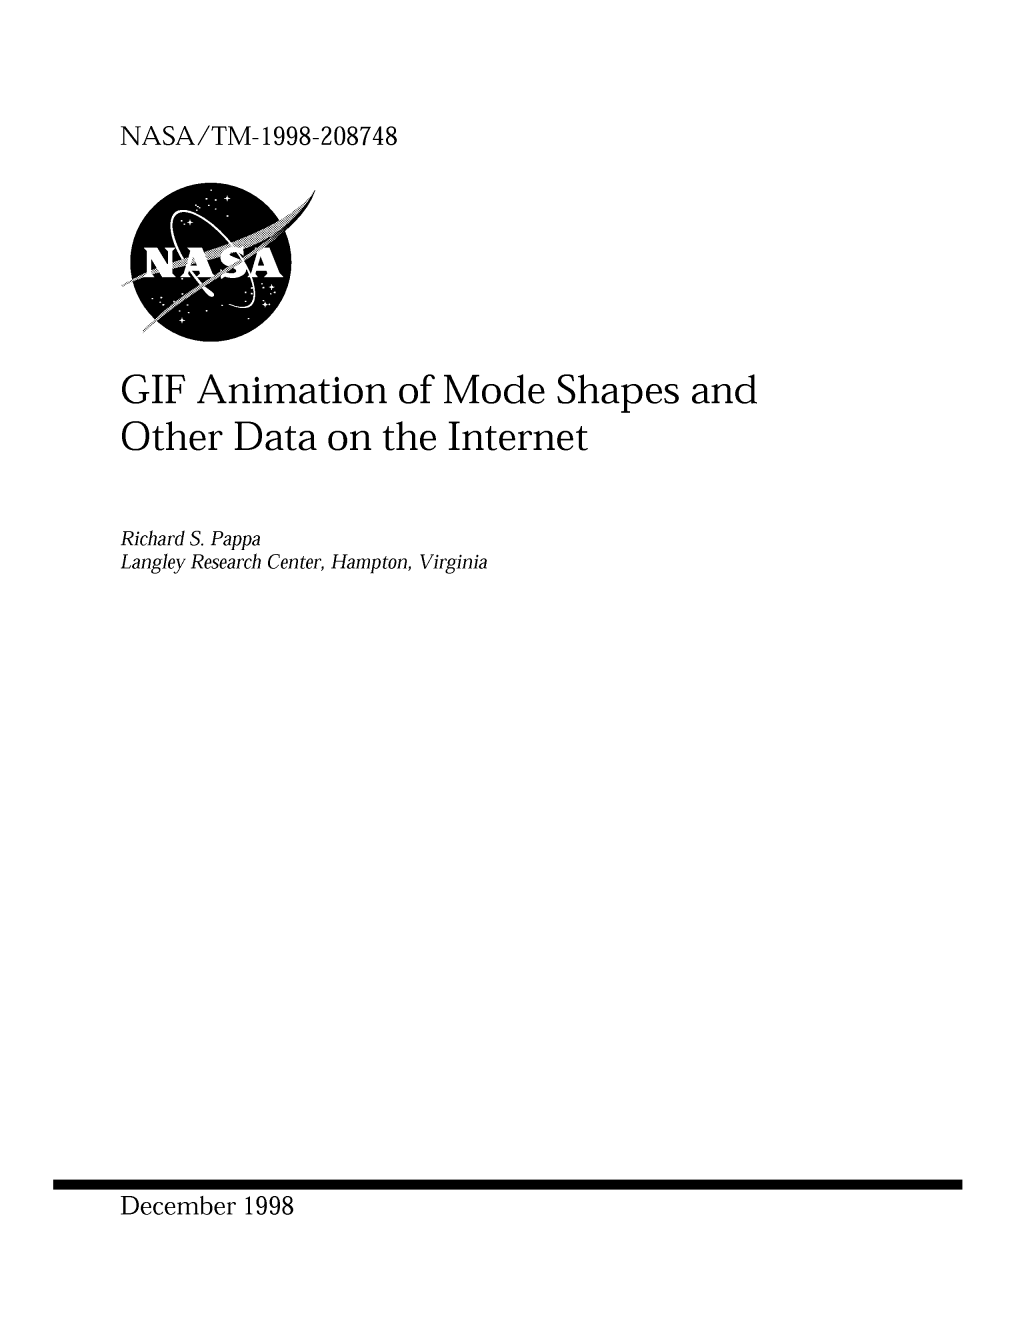 GIF Animation of Mode Shapes Other Data on the Internet